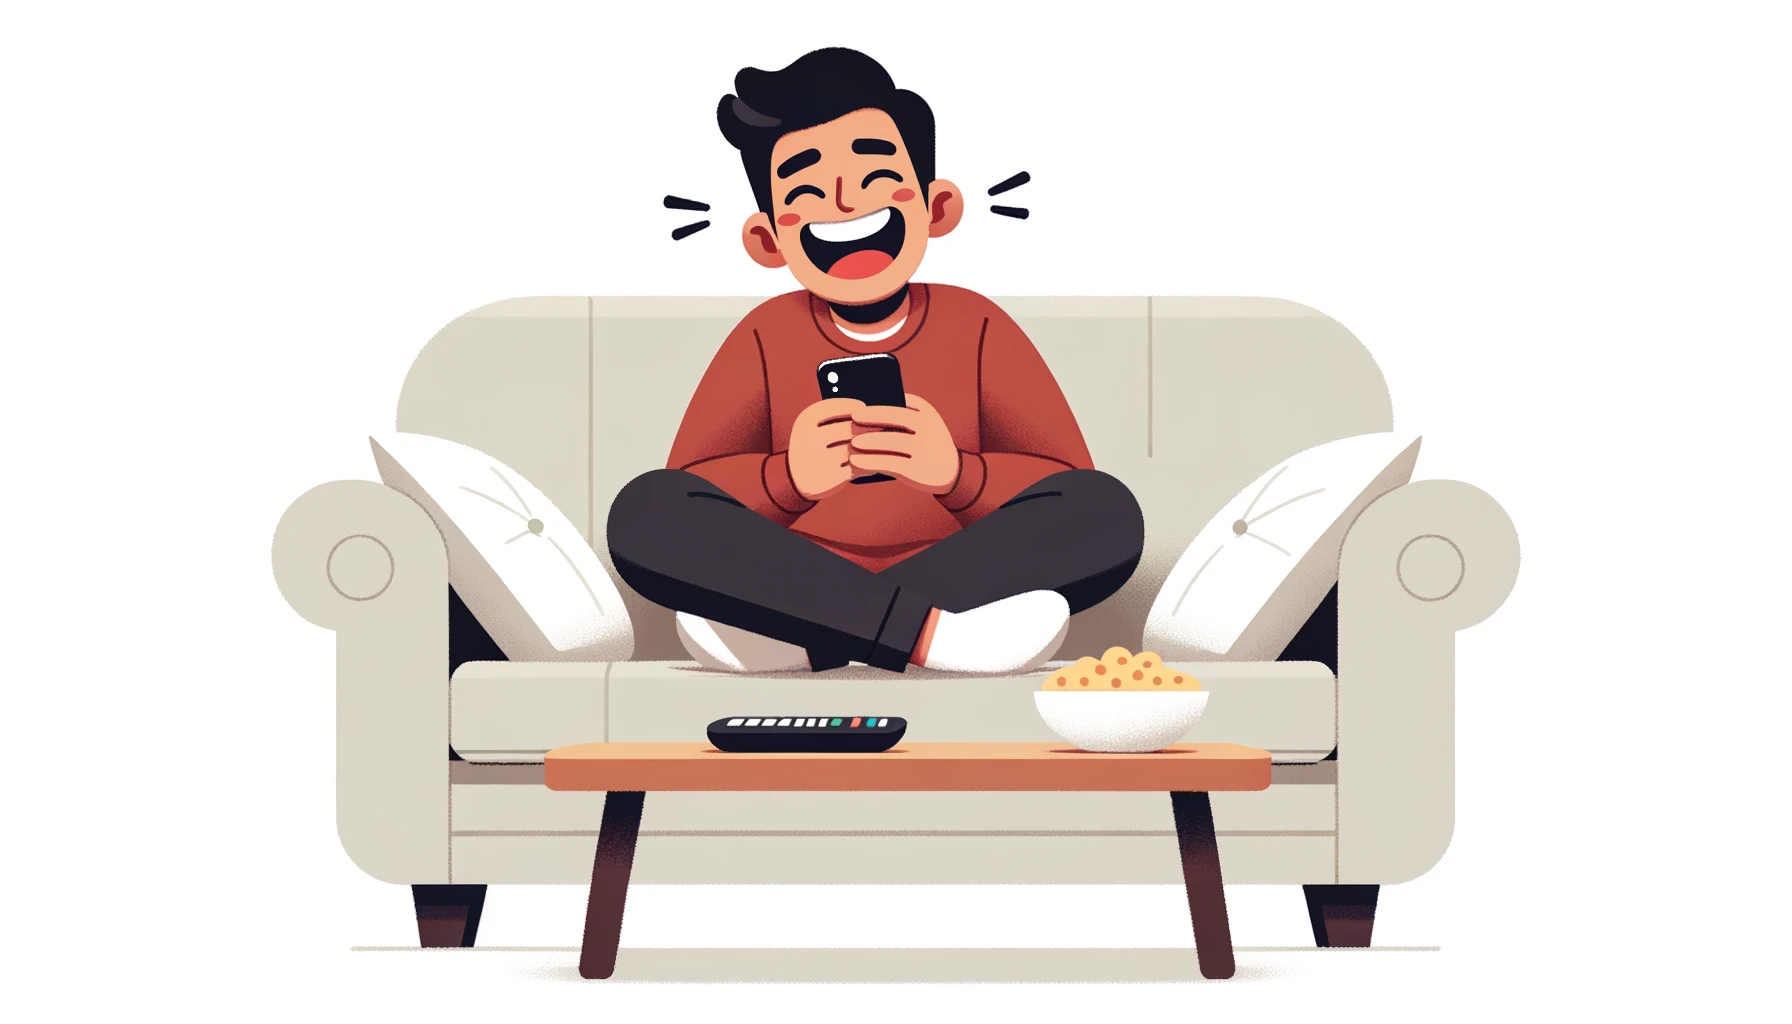 Illustration on a white background: An individual of Hispanic descent sits cross-legged on a couch, laughing at something on their smartphone. A coffee table in front of them has a snack bowl and a remote control.